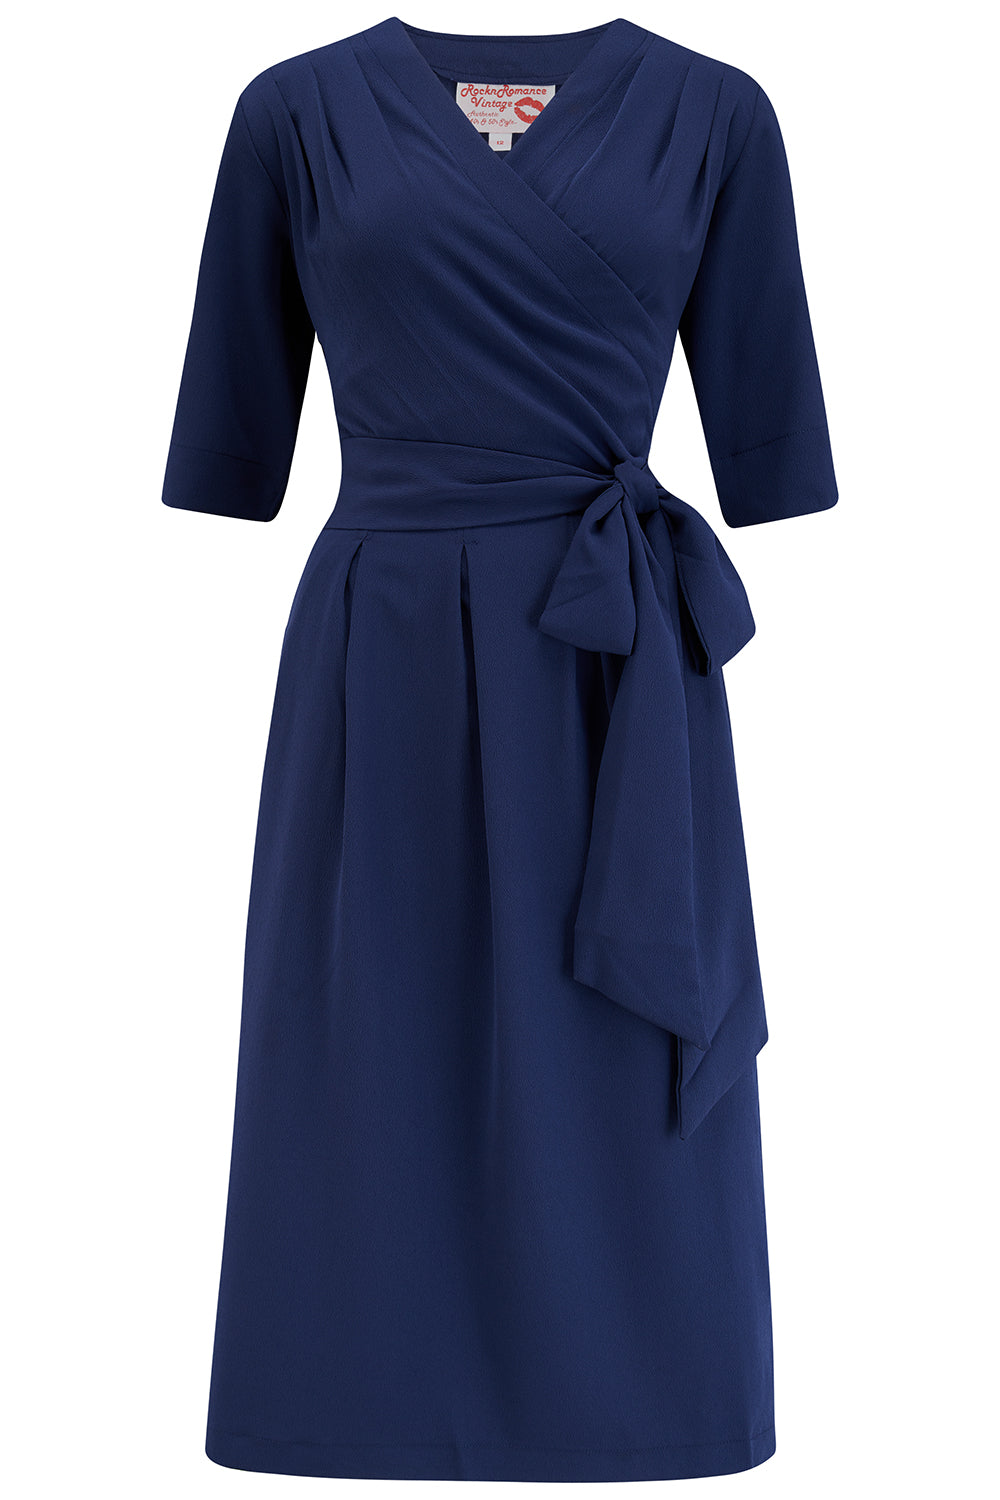 The "Vivien" Full Wrap Dress in Navy, True 1940s To Early 1950s Style